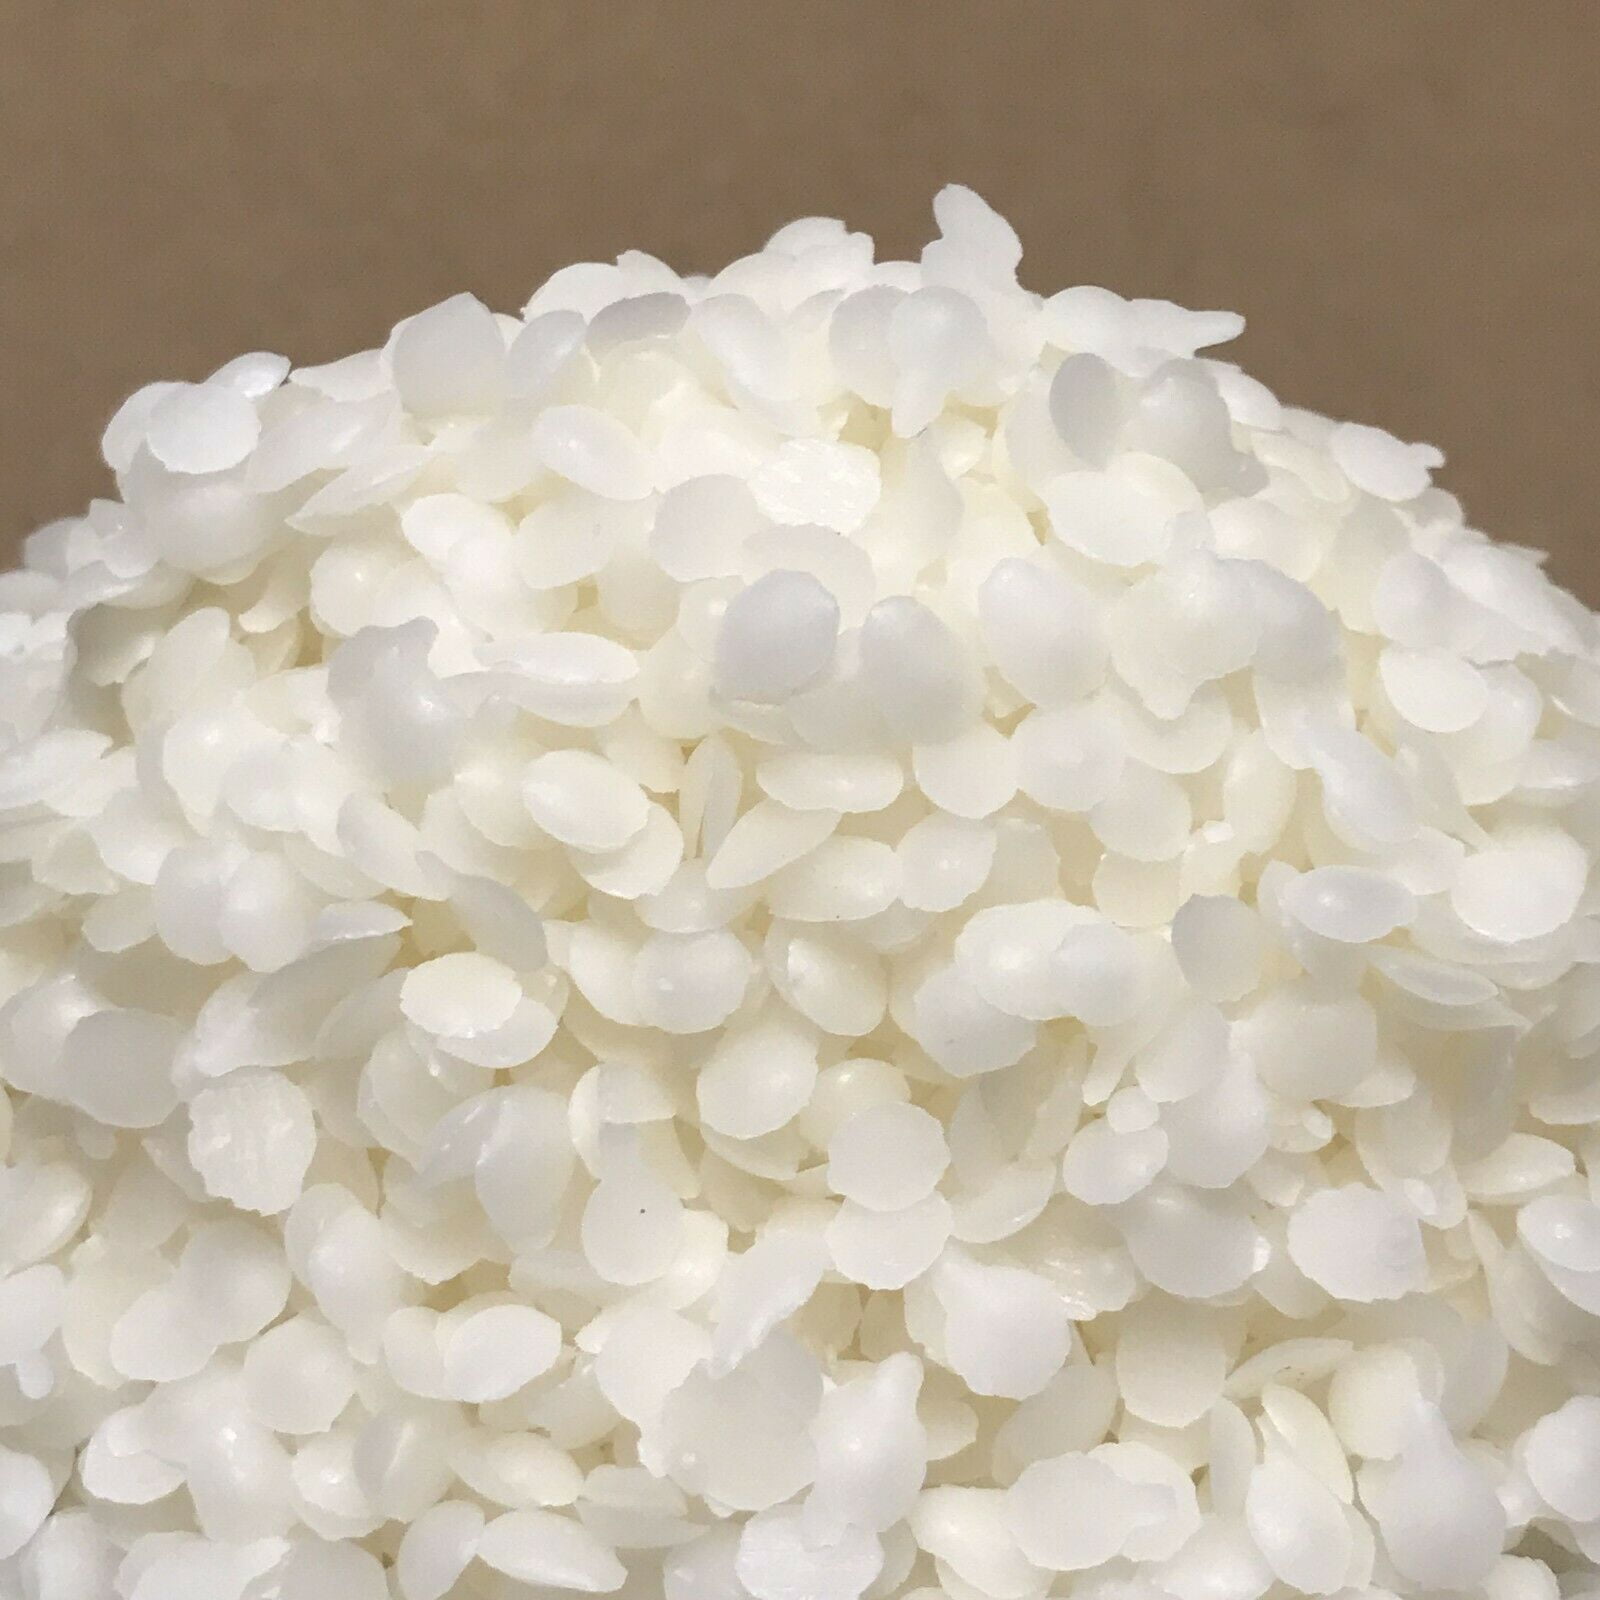 100g - 2kg White Beeswax natural, Beeswax filtered in granules.